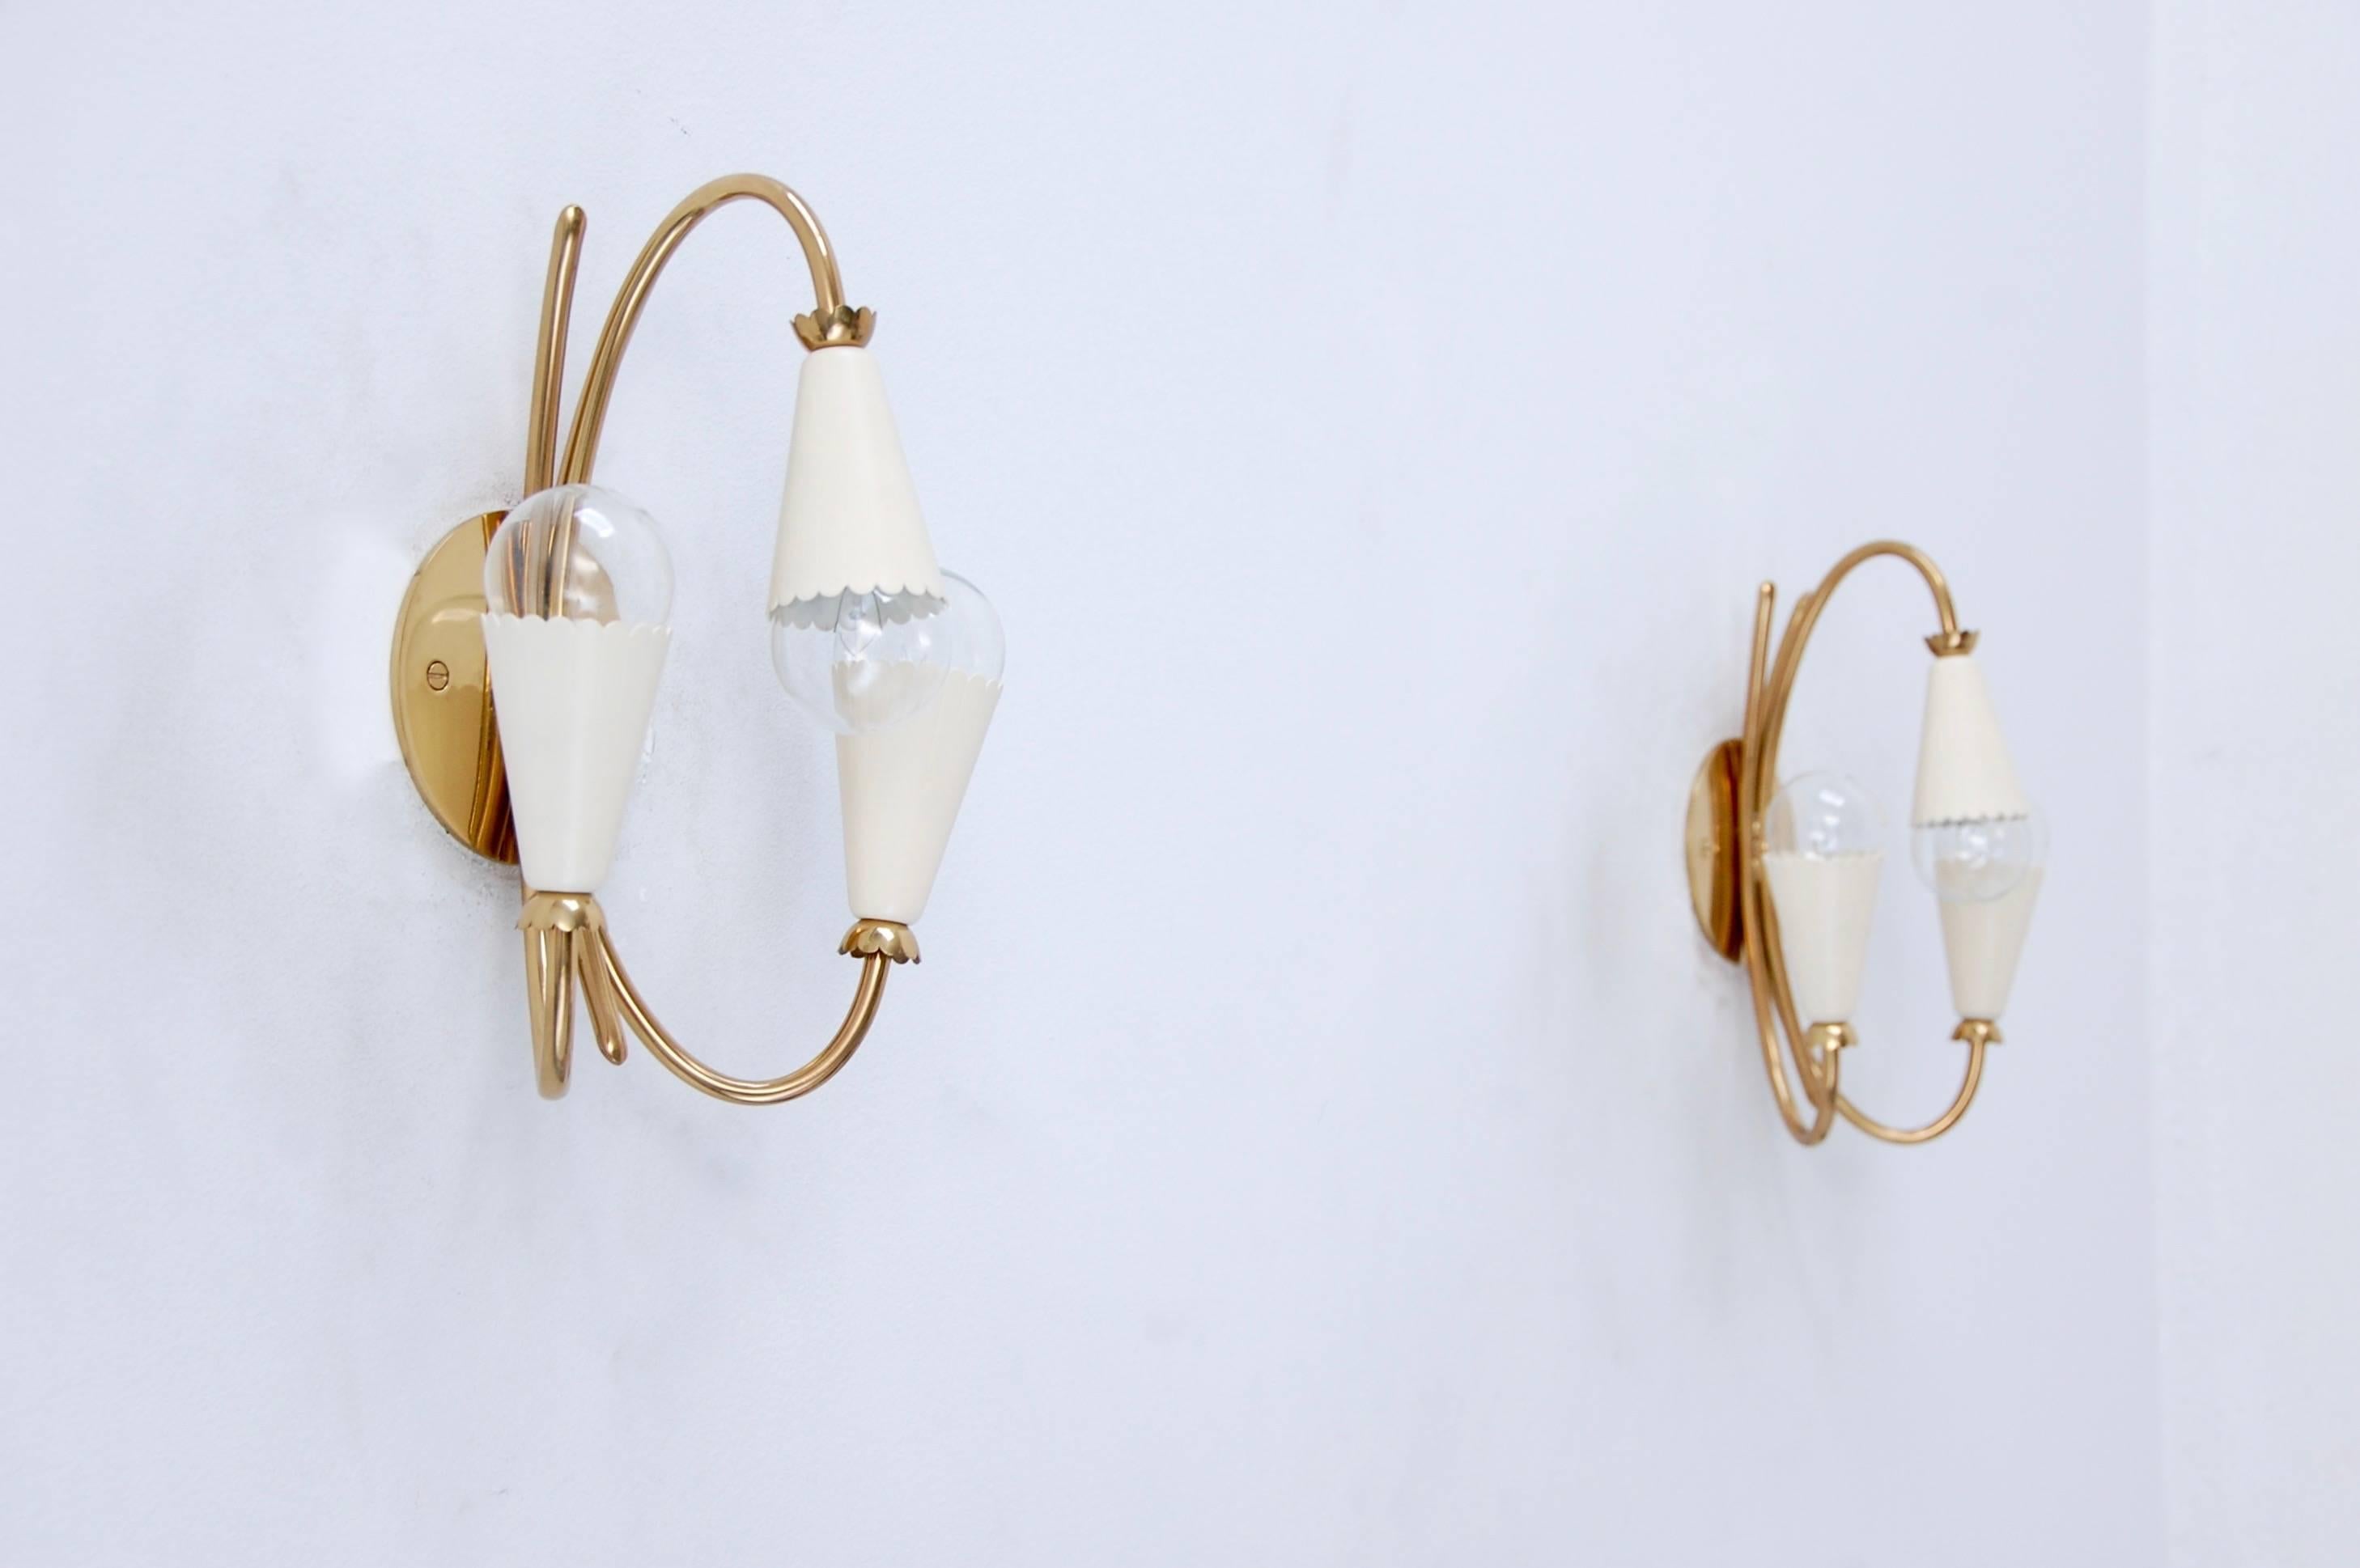 A lovely pair of Classic Italian botanical brass 1950s sconces. Fully restored, with (three) E12 candelabra based sockets per sconce. 
We at Lumfardo Luminaires do all the restorations of our vintage collection in house from our studio in Los